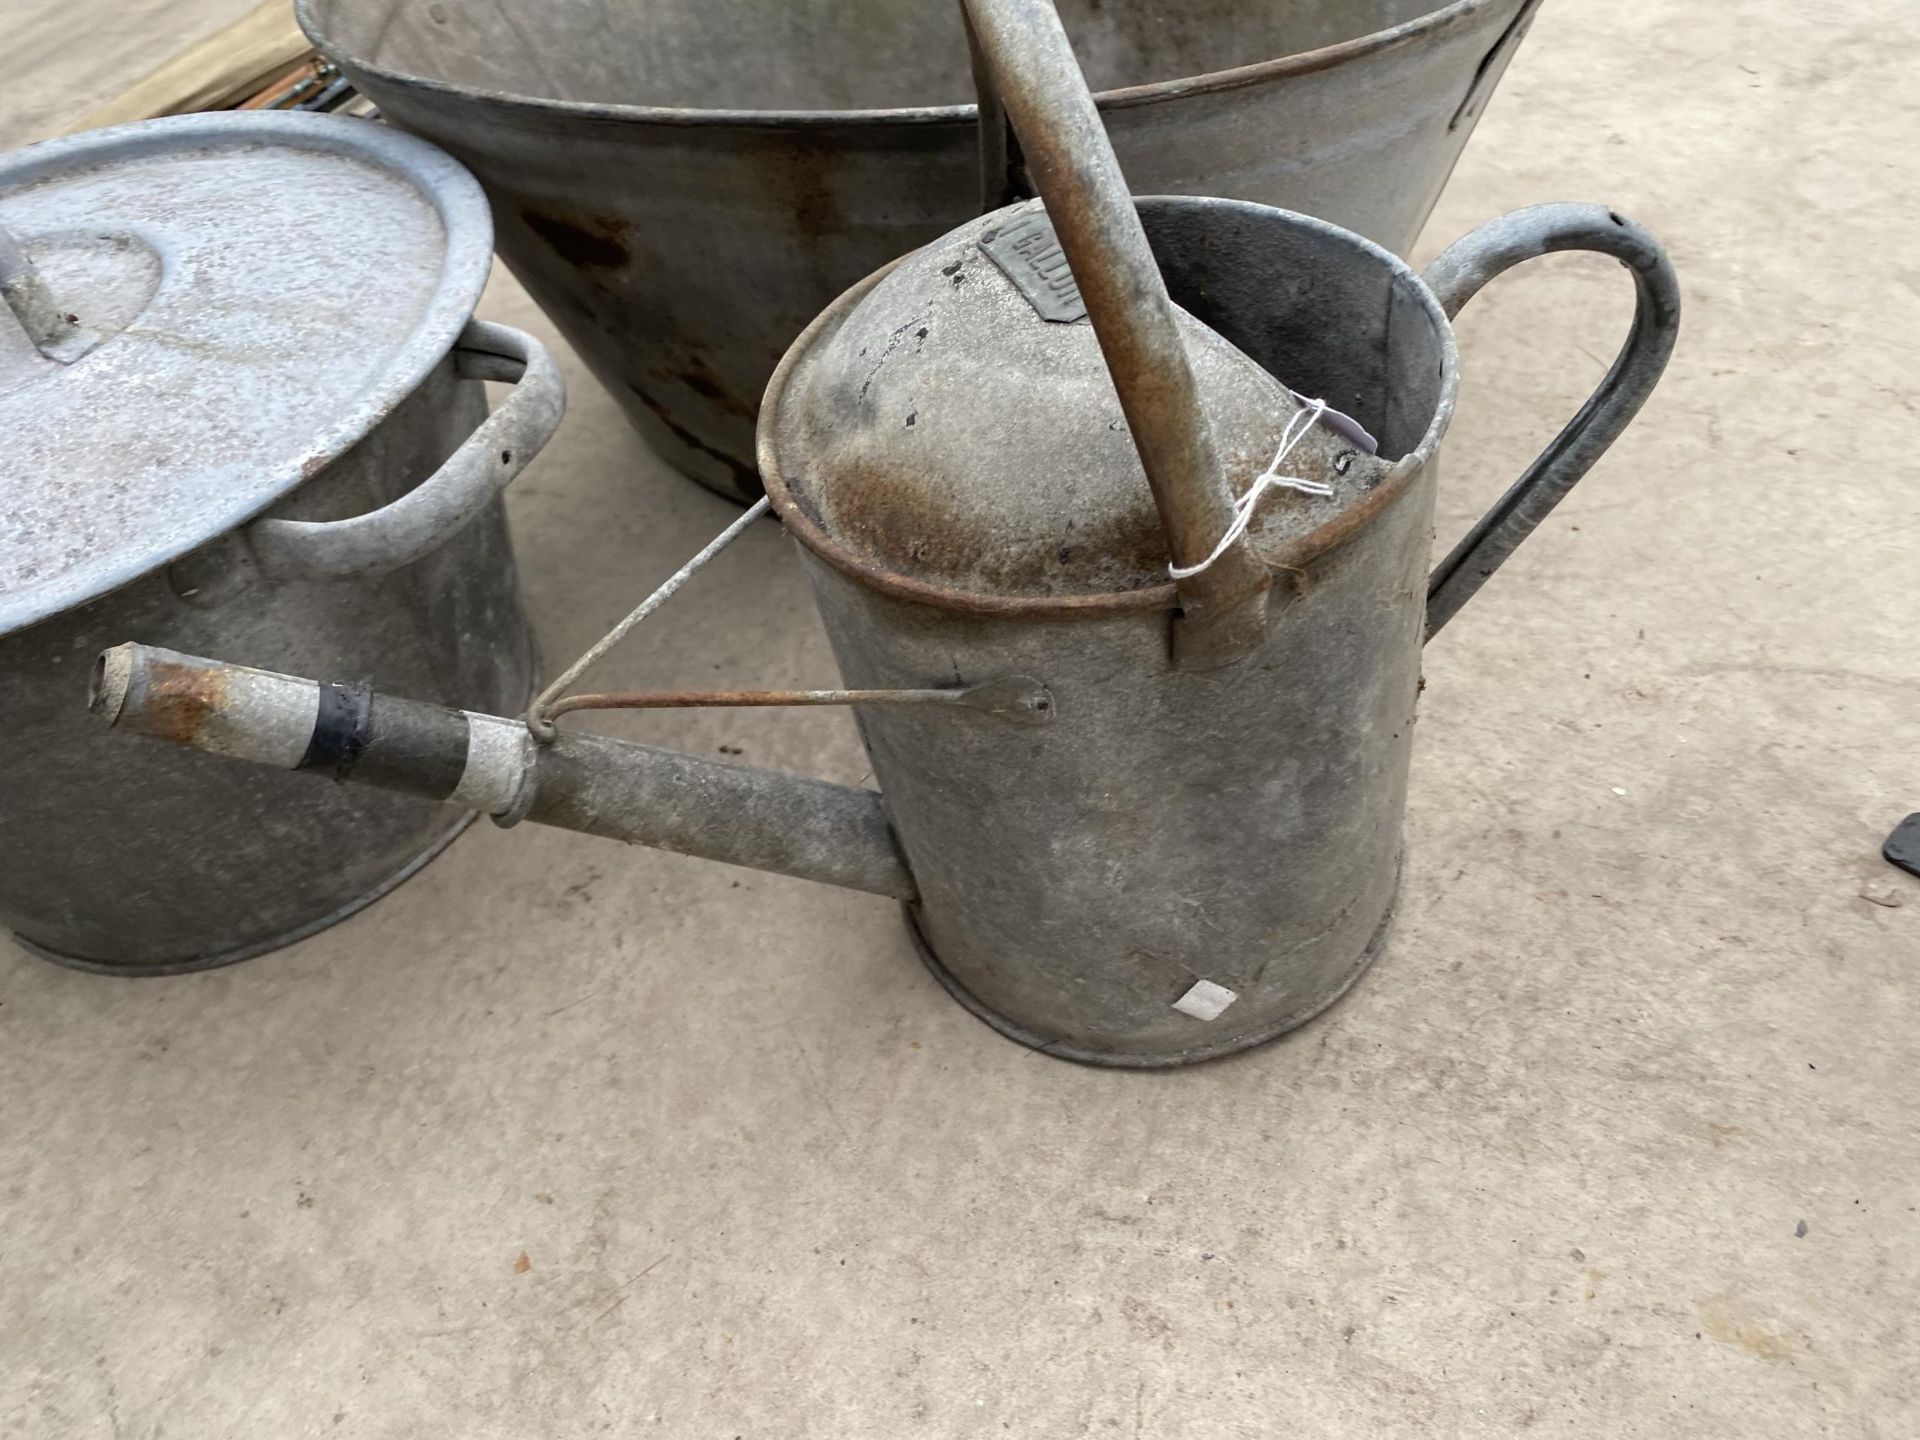 A VINTAGE GALVANISED TIN BATH, A GALVANISED WATERING CAN AND A GALVANISED PAN - Image 2 of 4